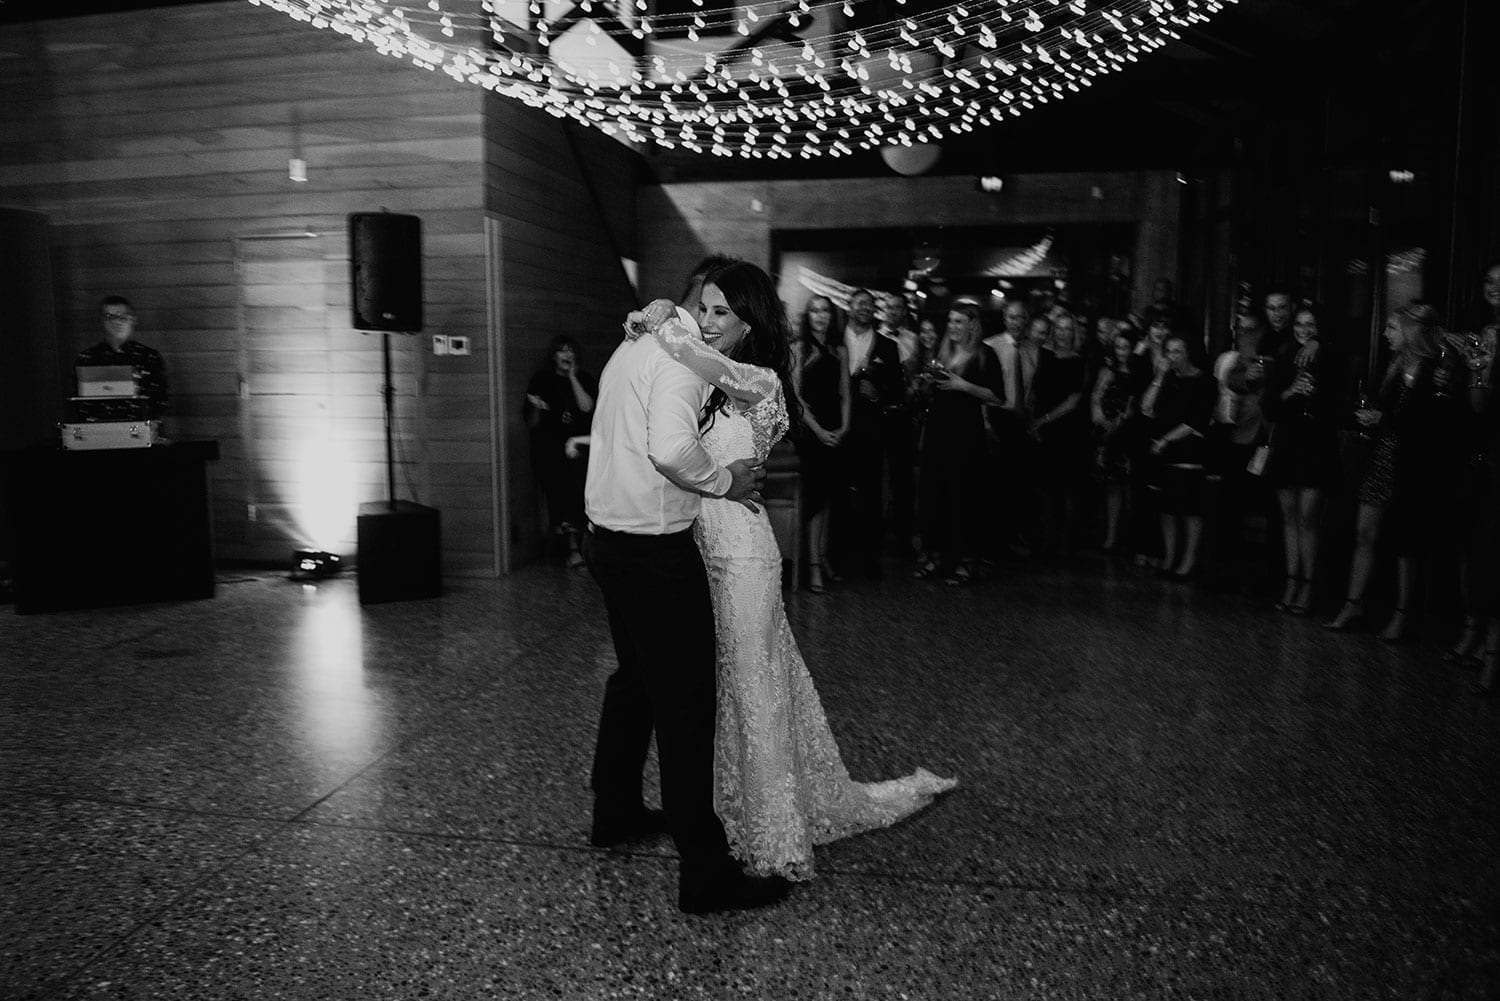 Vinka Design Features Real Weddings - Bride in custom made gown first dance with groom in black and white